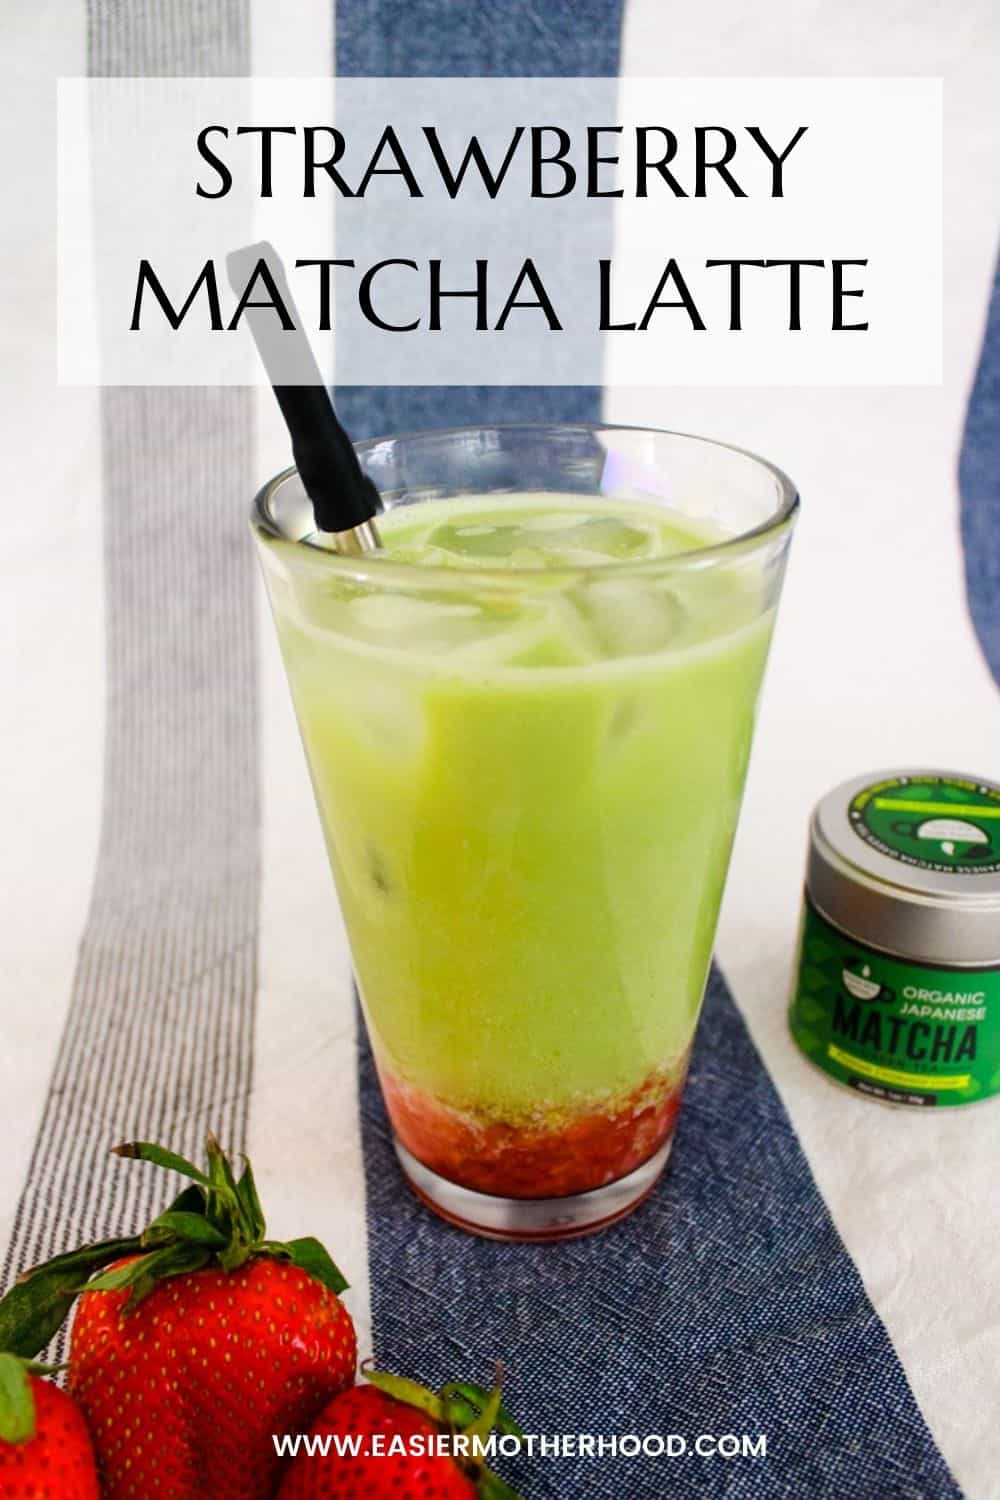 Pin displaying beverage, strawberries, and matcha on striped background. Text reads "strawberry matcha latte".